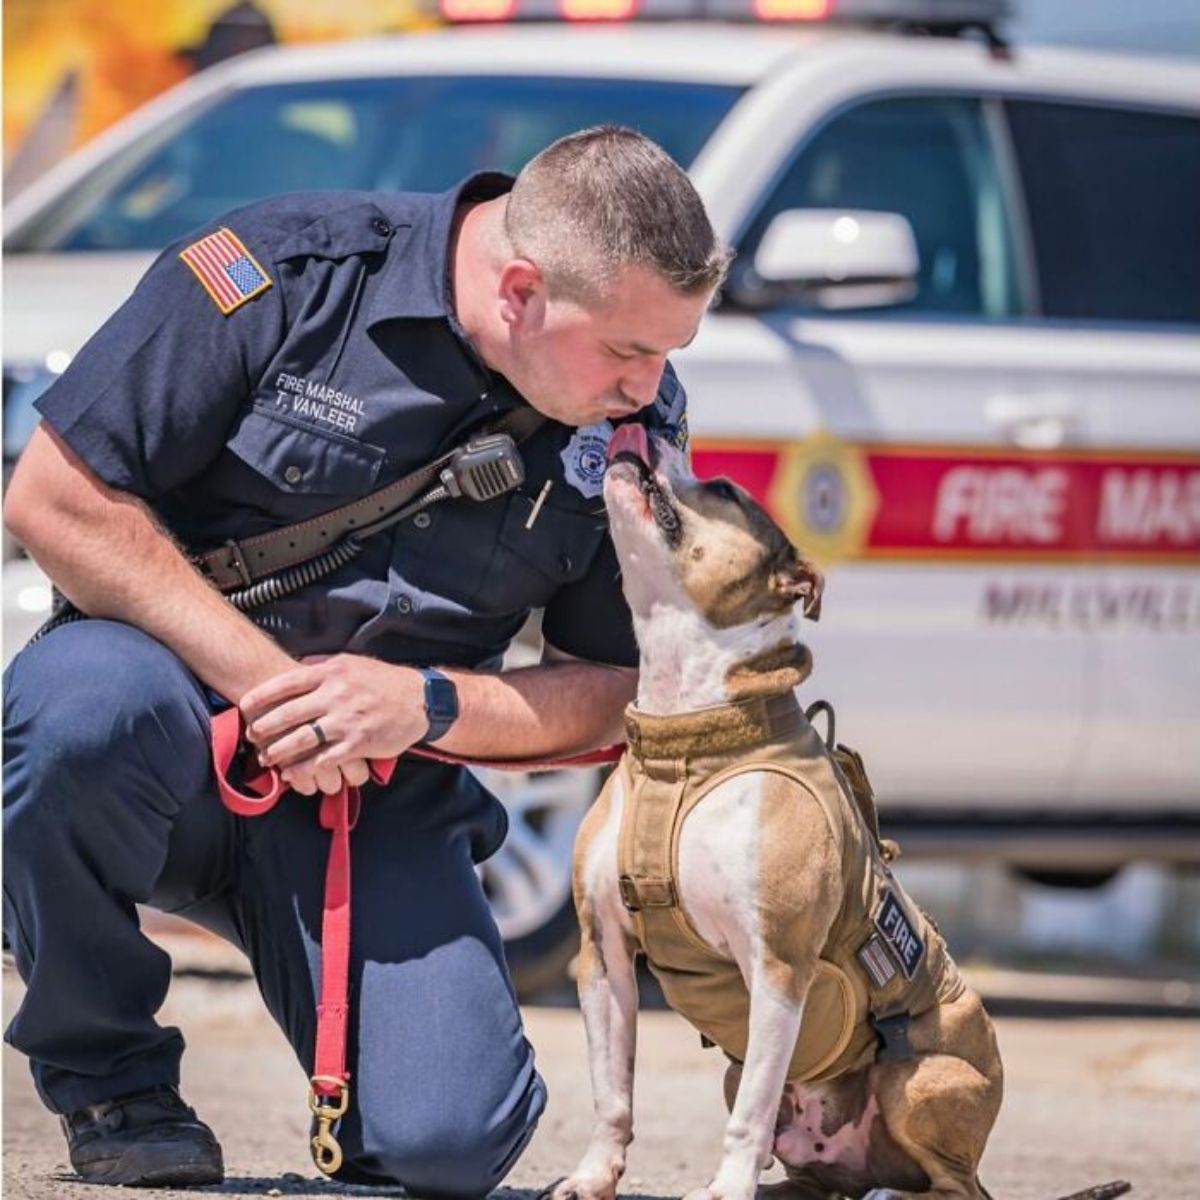 brown and white pitbull in a brown harness licking a male fire marshal crouching on the ground